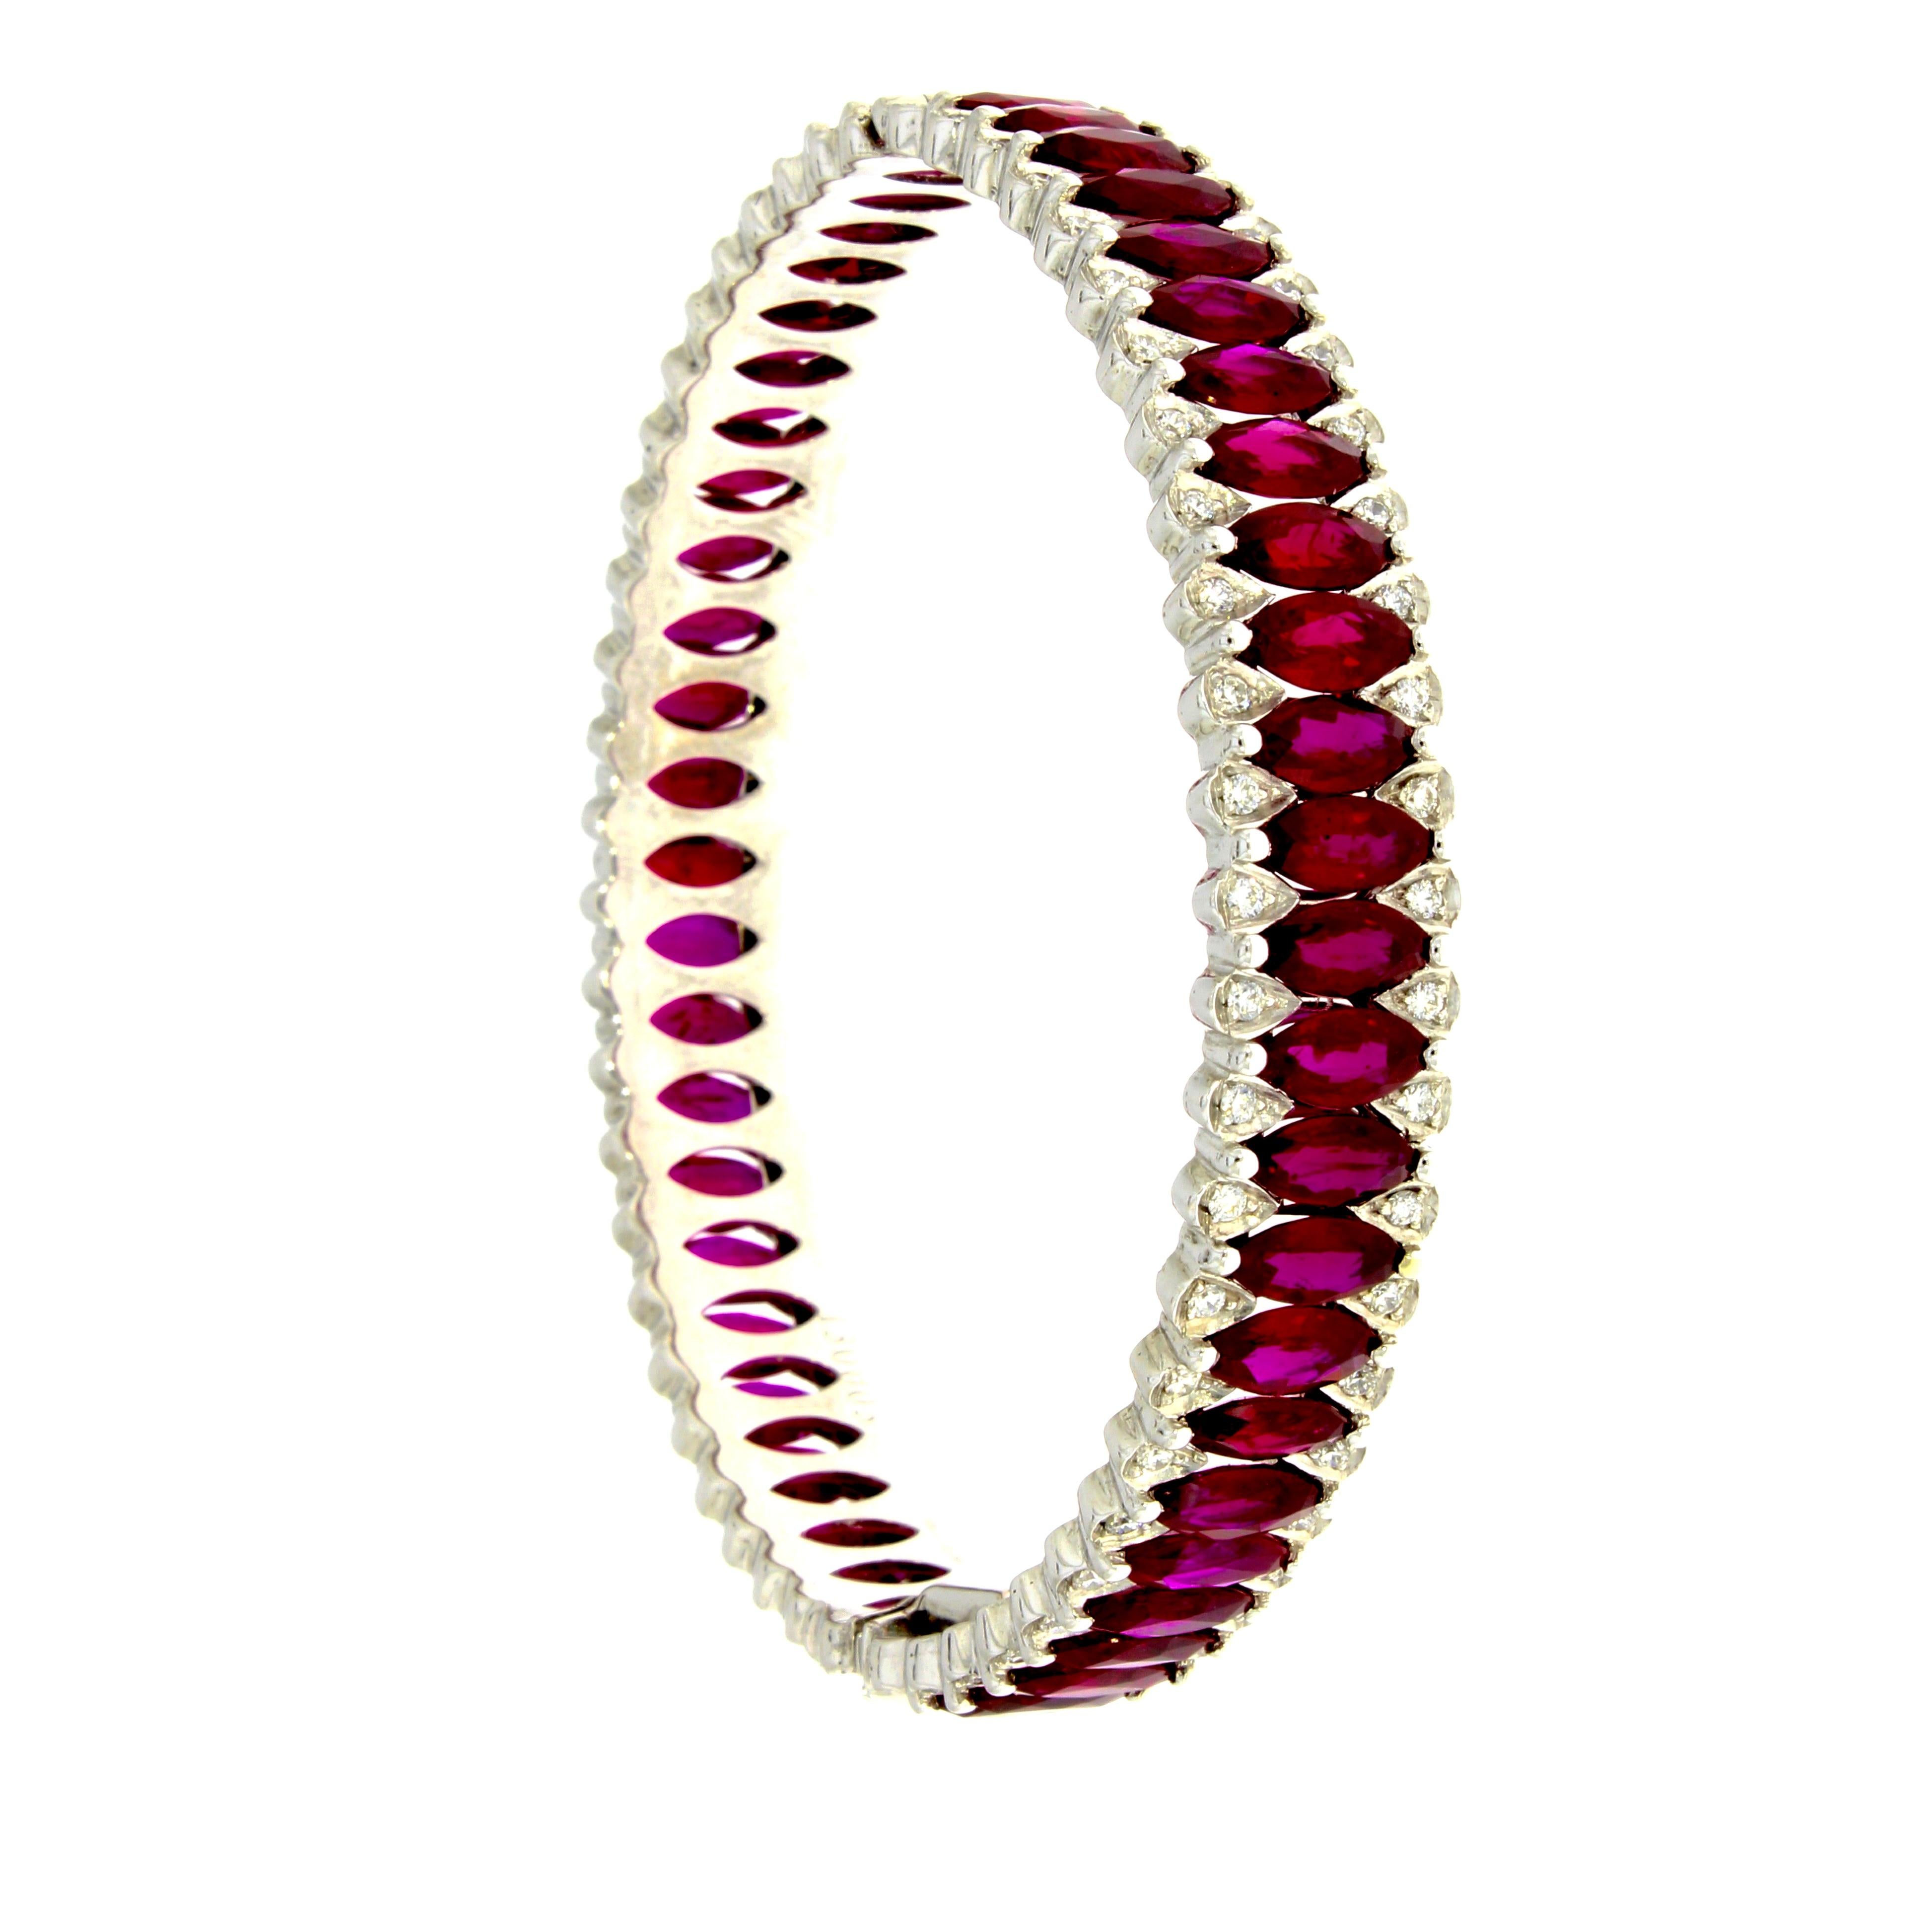 A perpetual circle of vibrant marquise cut rubies poised between two delicate rows of brilliant cut diamonds fluidly wraps around the wrist.

Ruby Amore Eternity Bangle
Details
- 18 karat White Gold
- 20.30 Carat Ruby
- 1.14 carat Diamond

Diameter